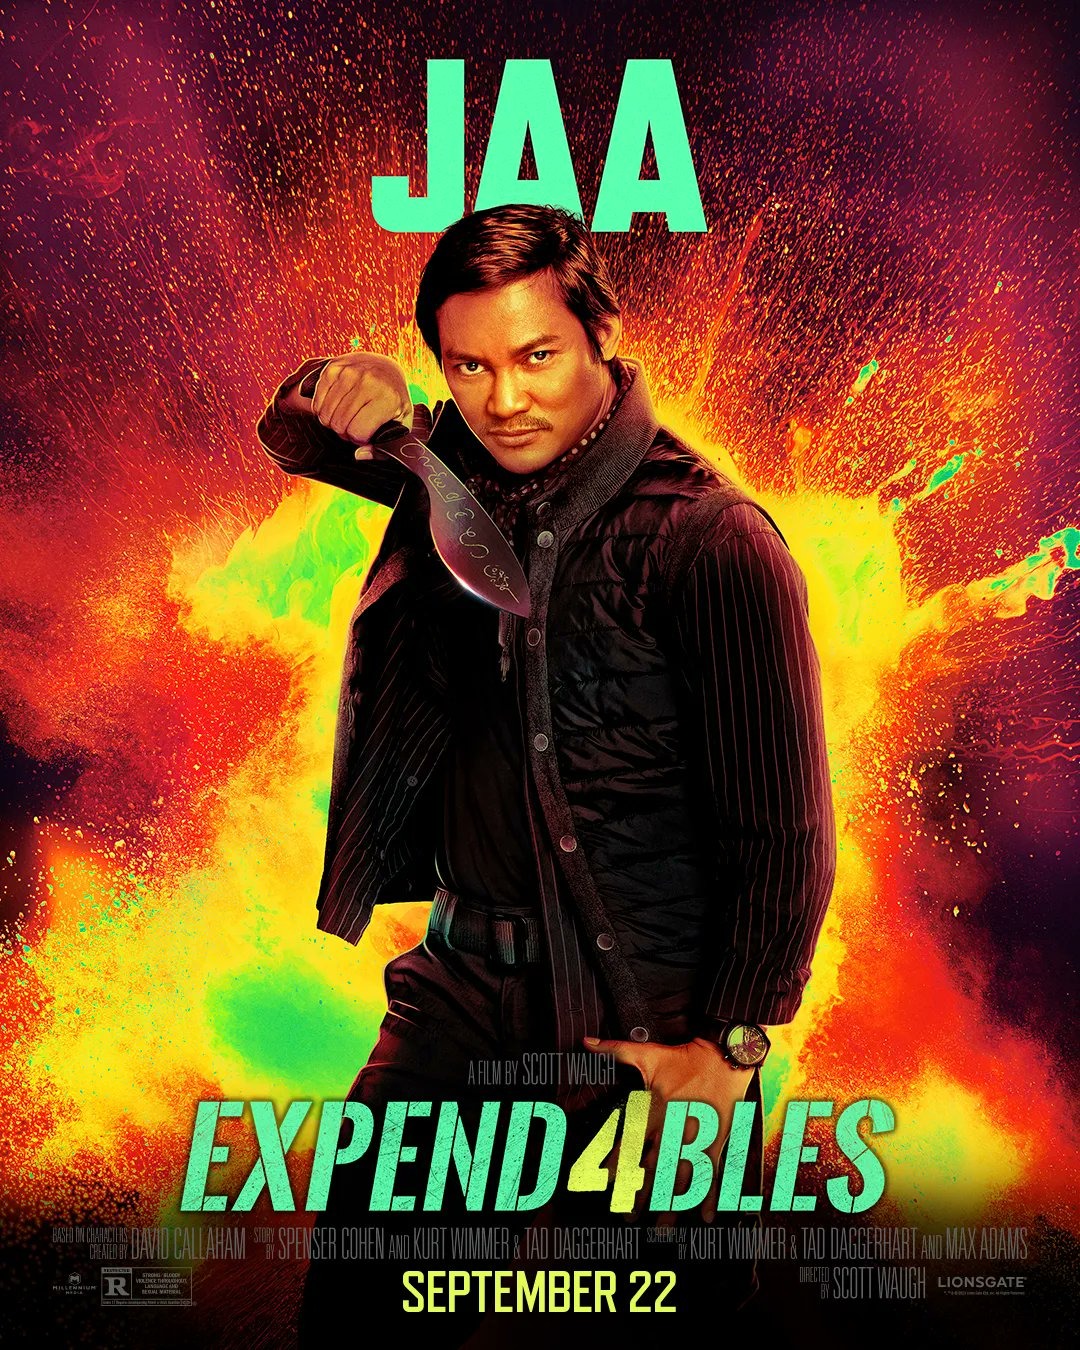 Tony Jaa in Expend4bles.